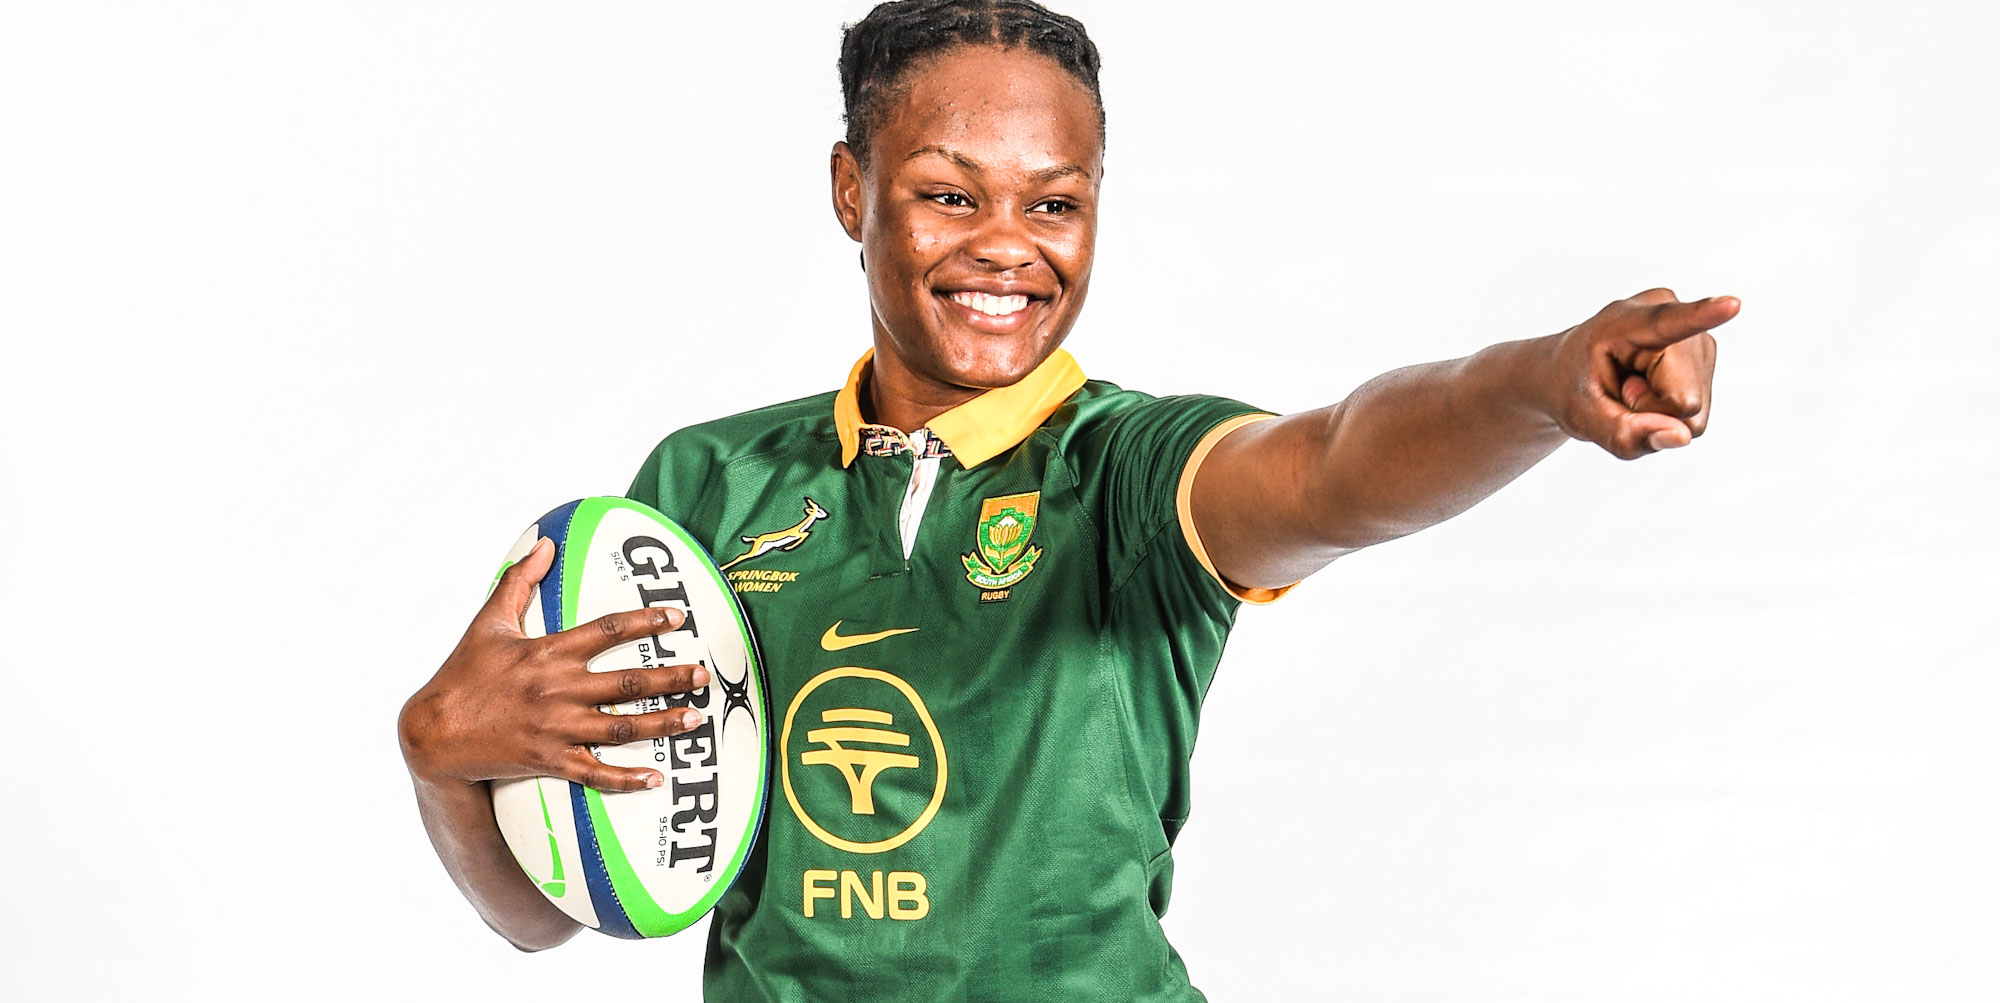 Sinelitha Noxeke is set to follow in her mother's footsteps by representing the Springbok Women in a Test.